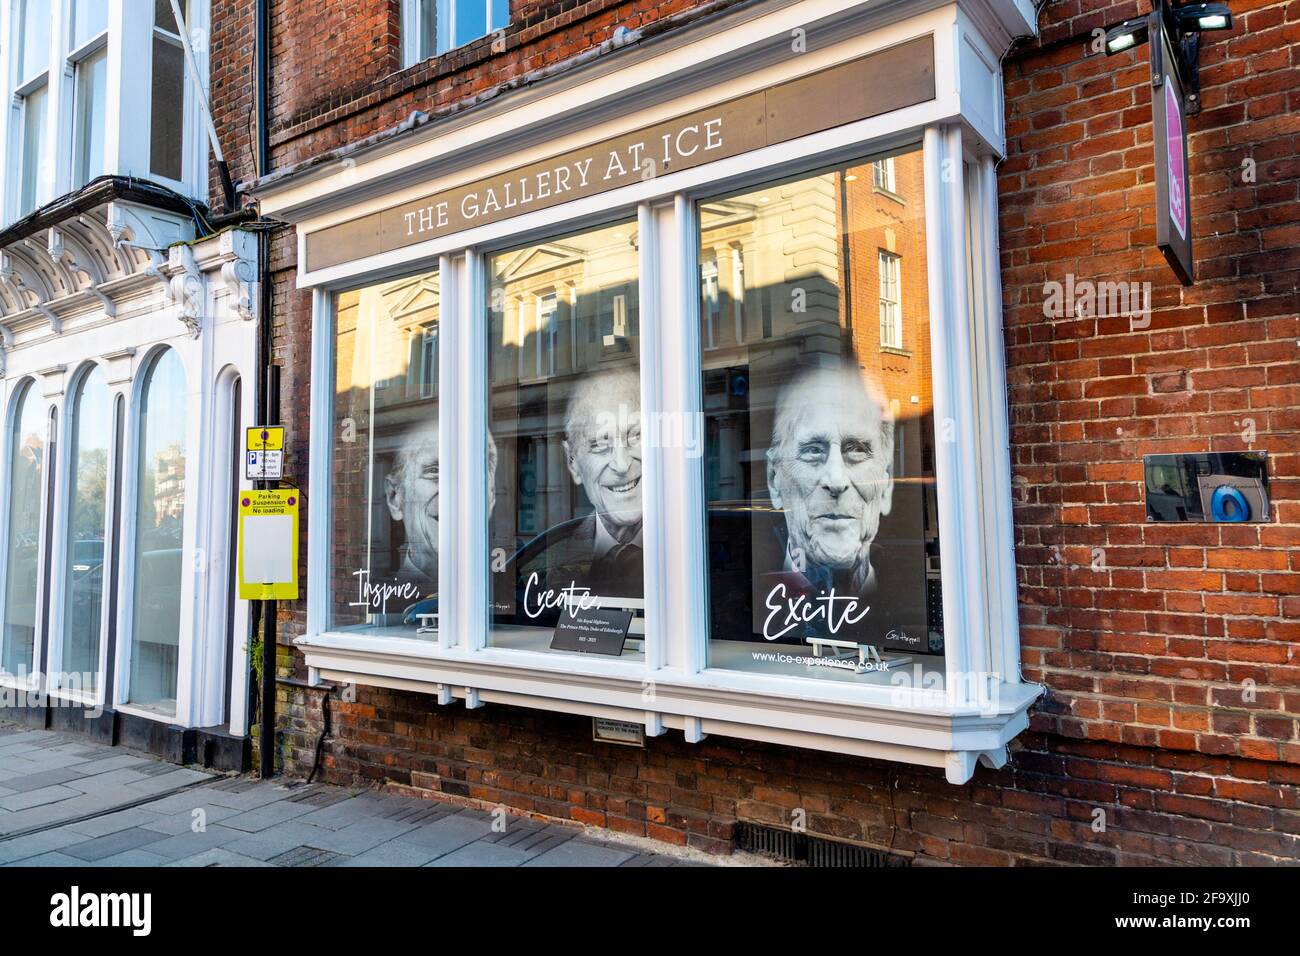 18 April 2021, Windsor, UK - Pictures of Prince Philip, Duke of Edinburgh, displayed in The Gallery at Ice window after his death on the 9th April Stock Photo